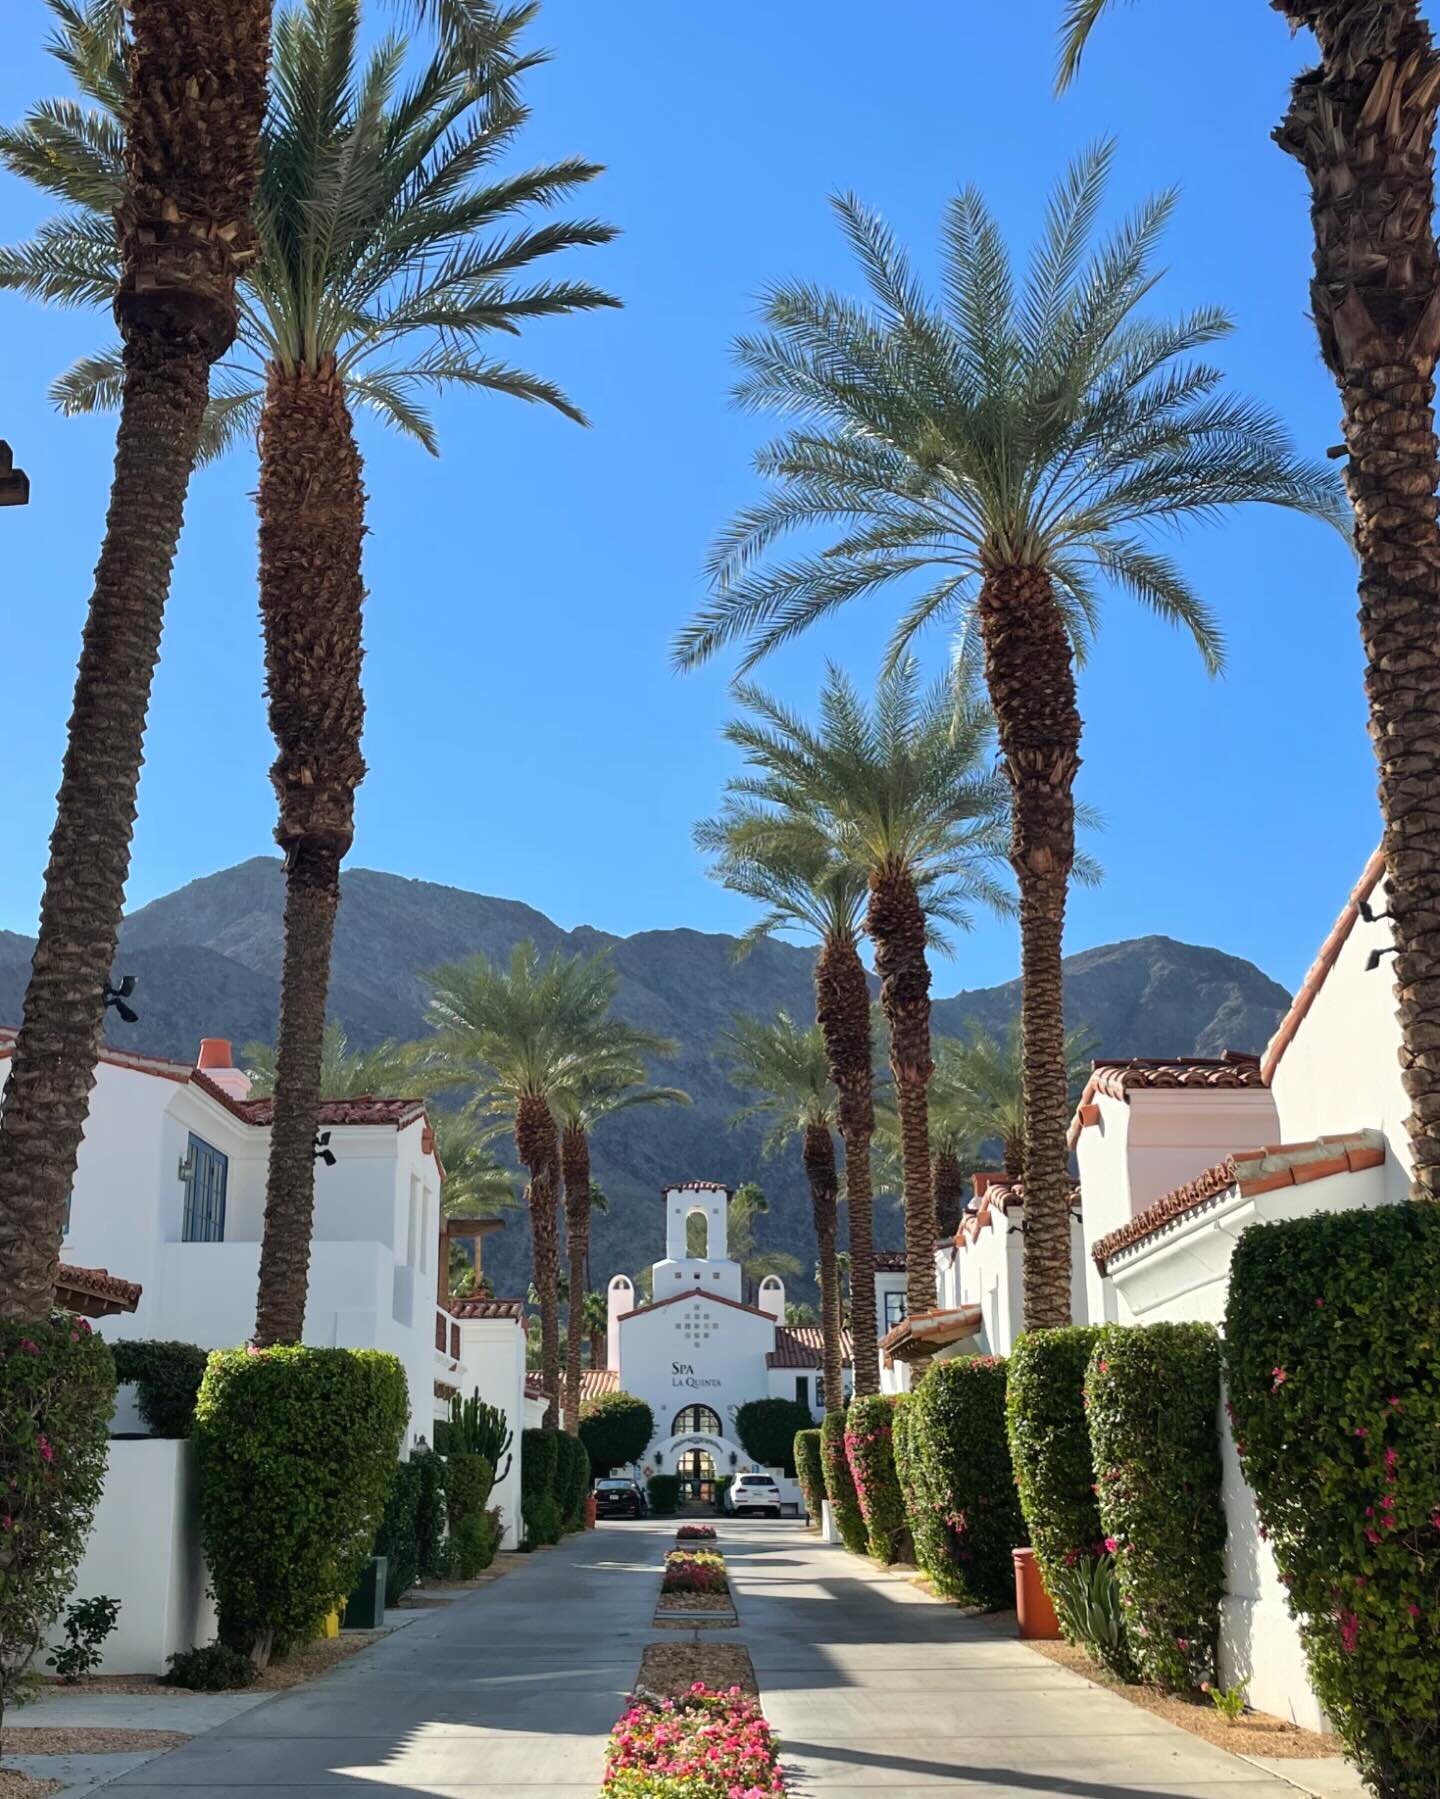 While watching the Golden Bachelor wedding, I&rsquo;m reminiscing on my visit to the beautiful @laquintaresort  in La Quinta, California located just right outside of Palm Springs, California. 

This resort is perfect for both families and a couple l